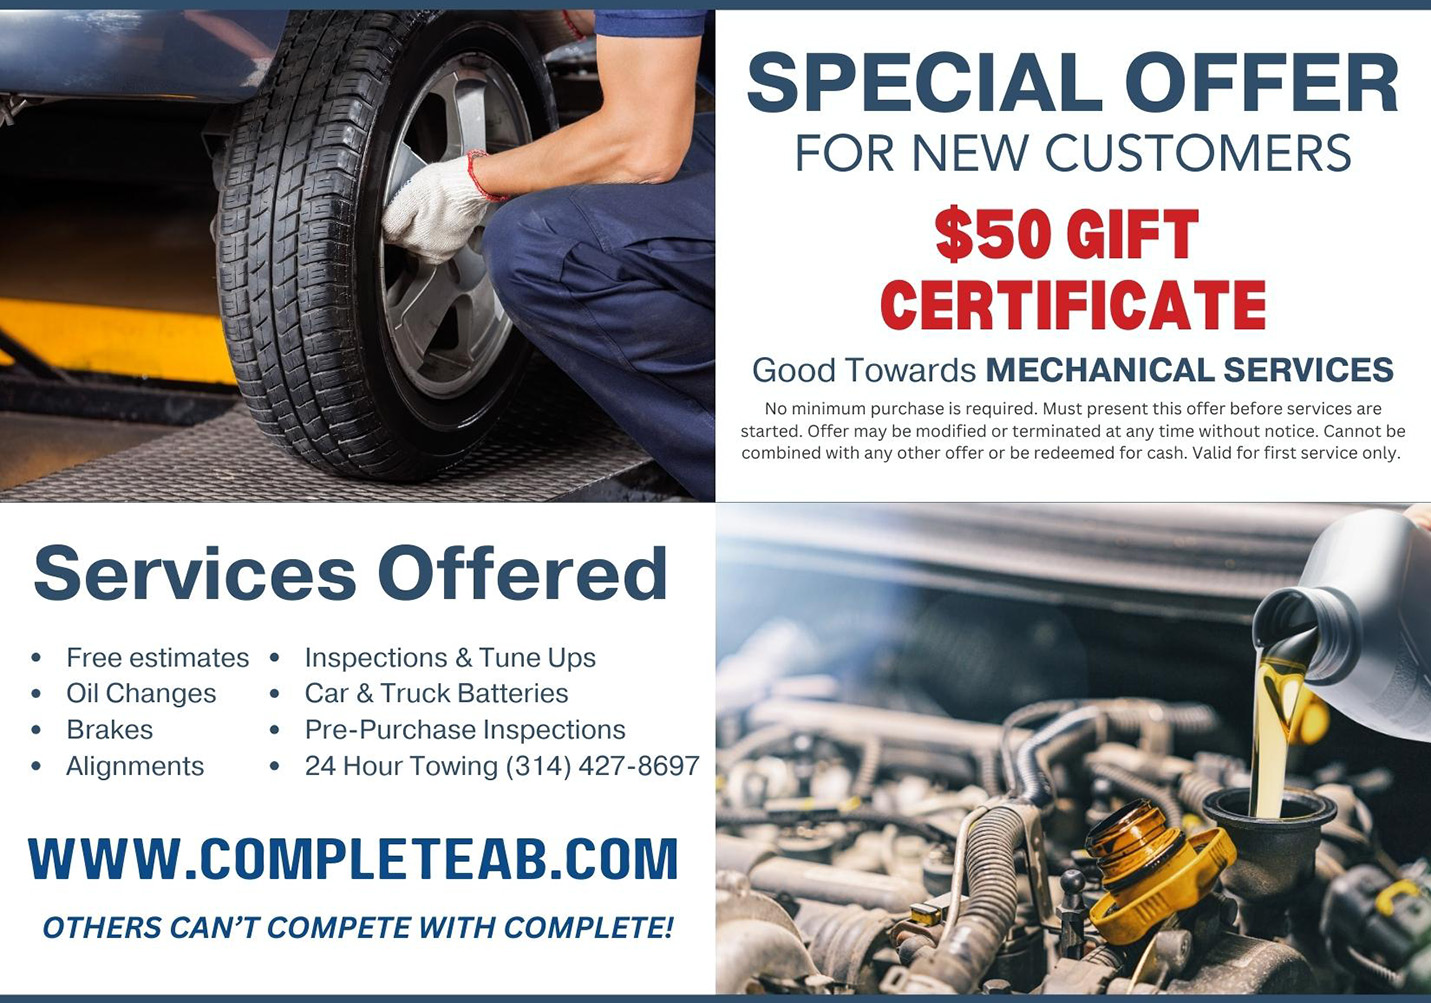 Complete Auto Body & Repair $50 Off Gift Certificate for new customers. Good for Mechanical Services only.